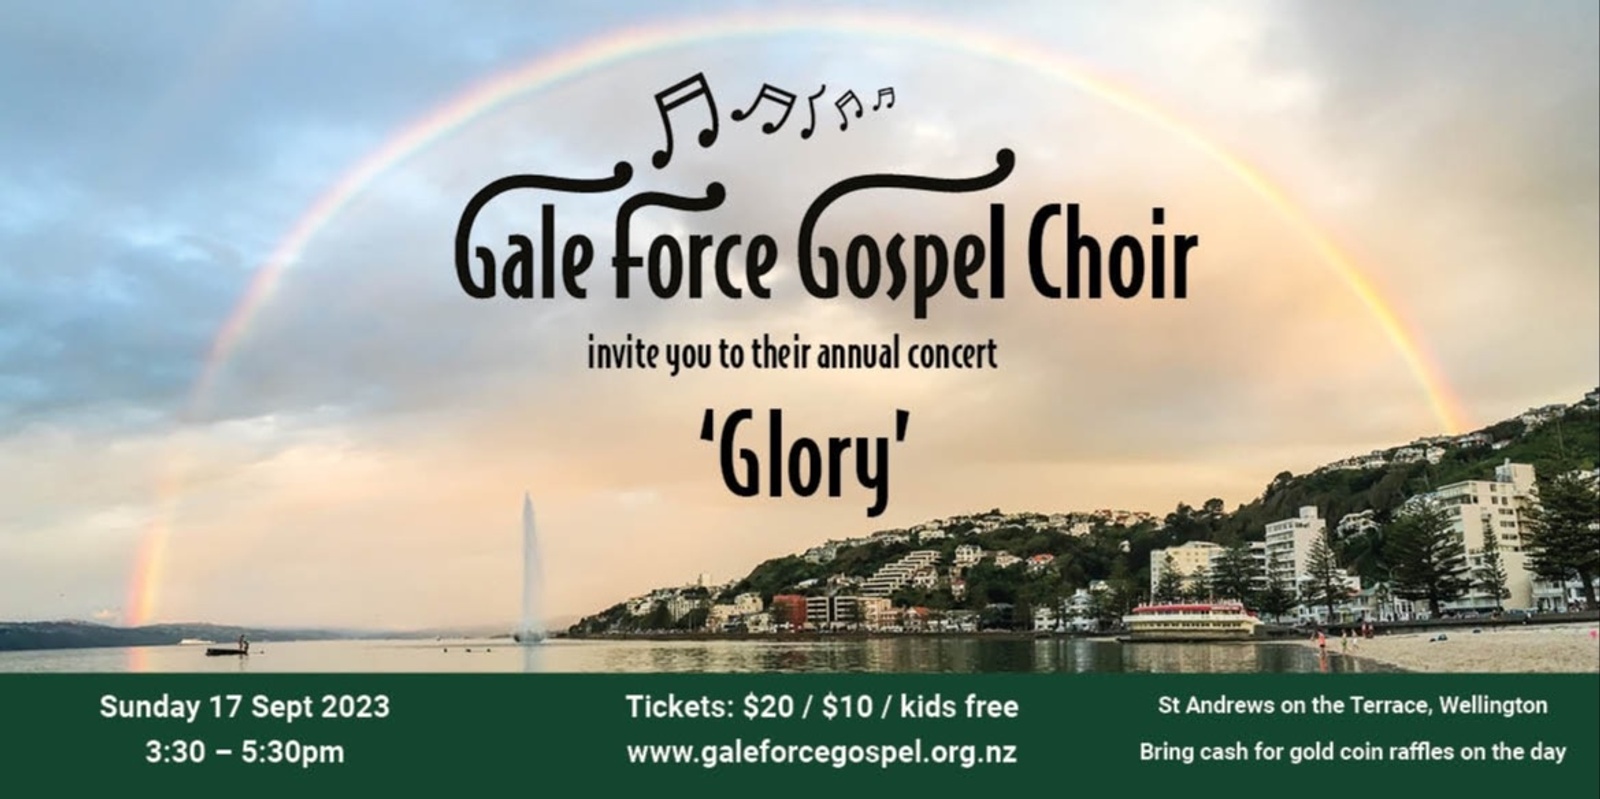 Banner image for Glory, a concert by Gale Force Gospel Choir